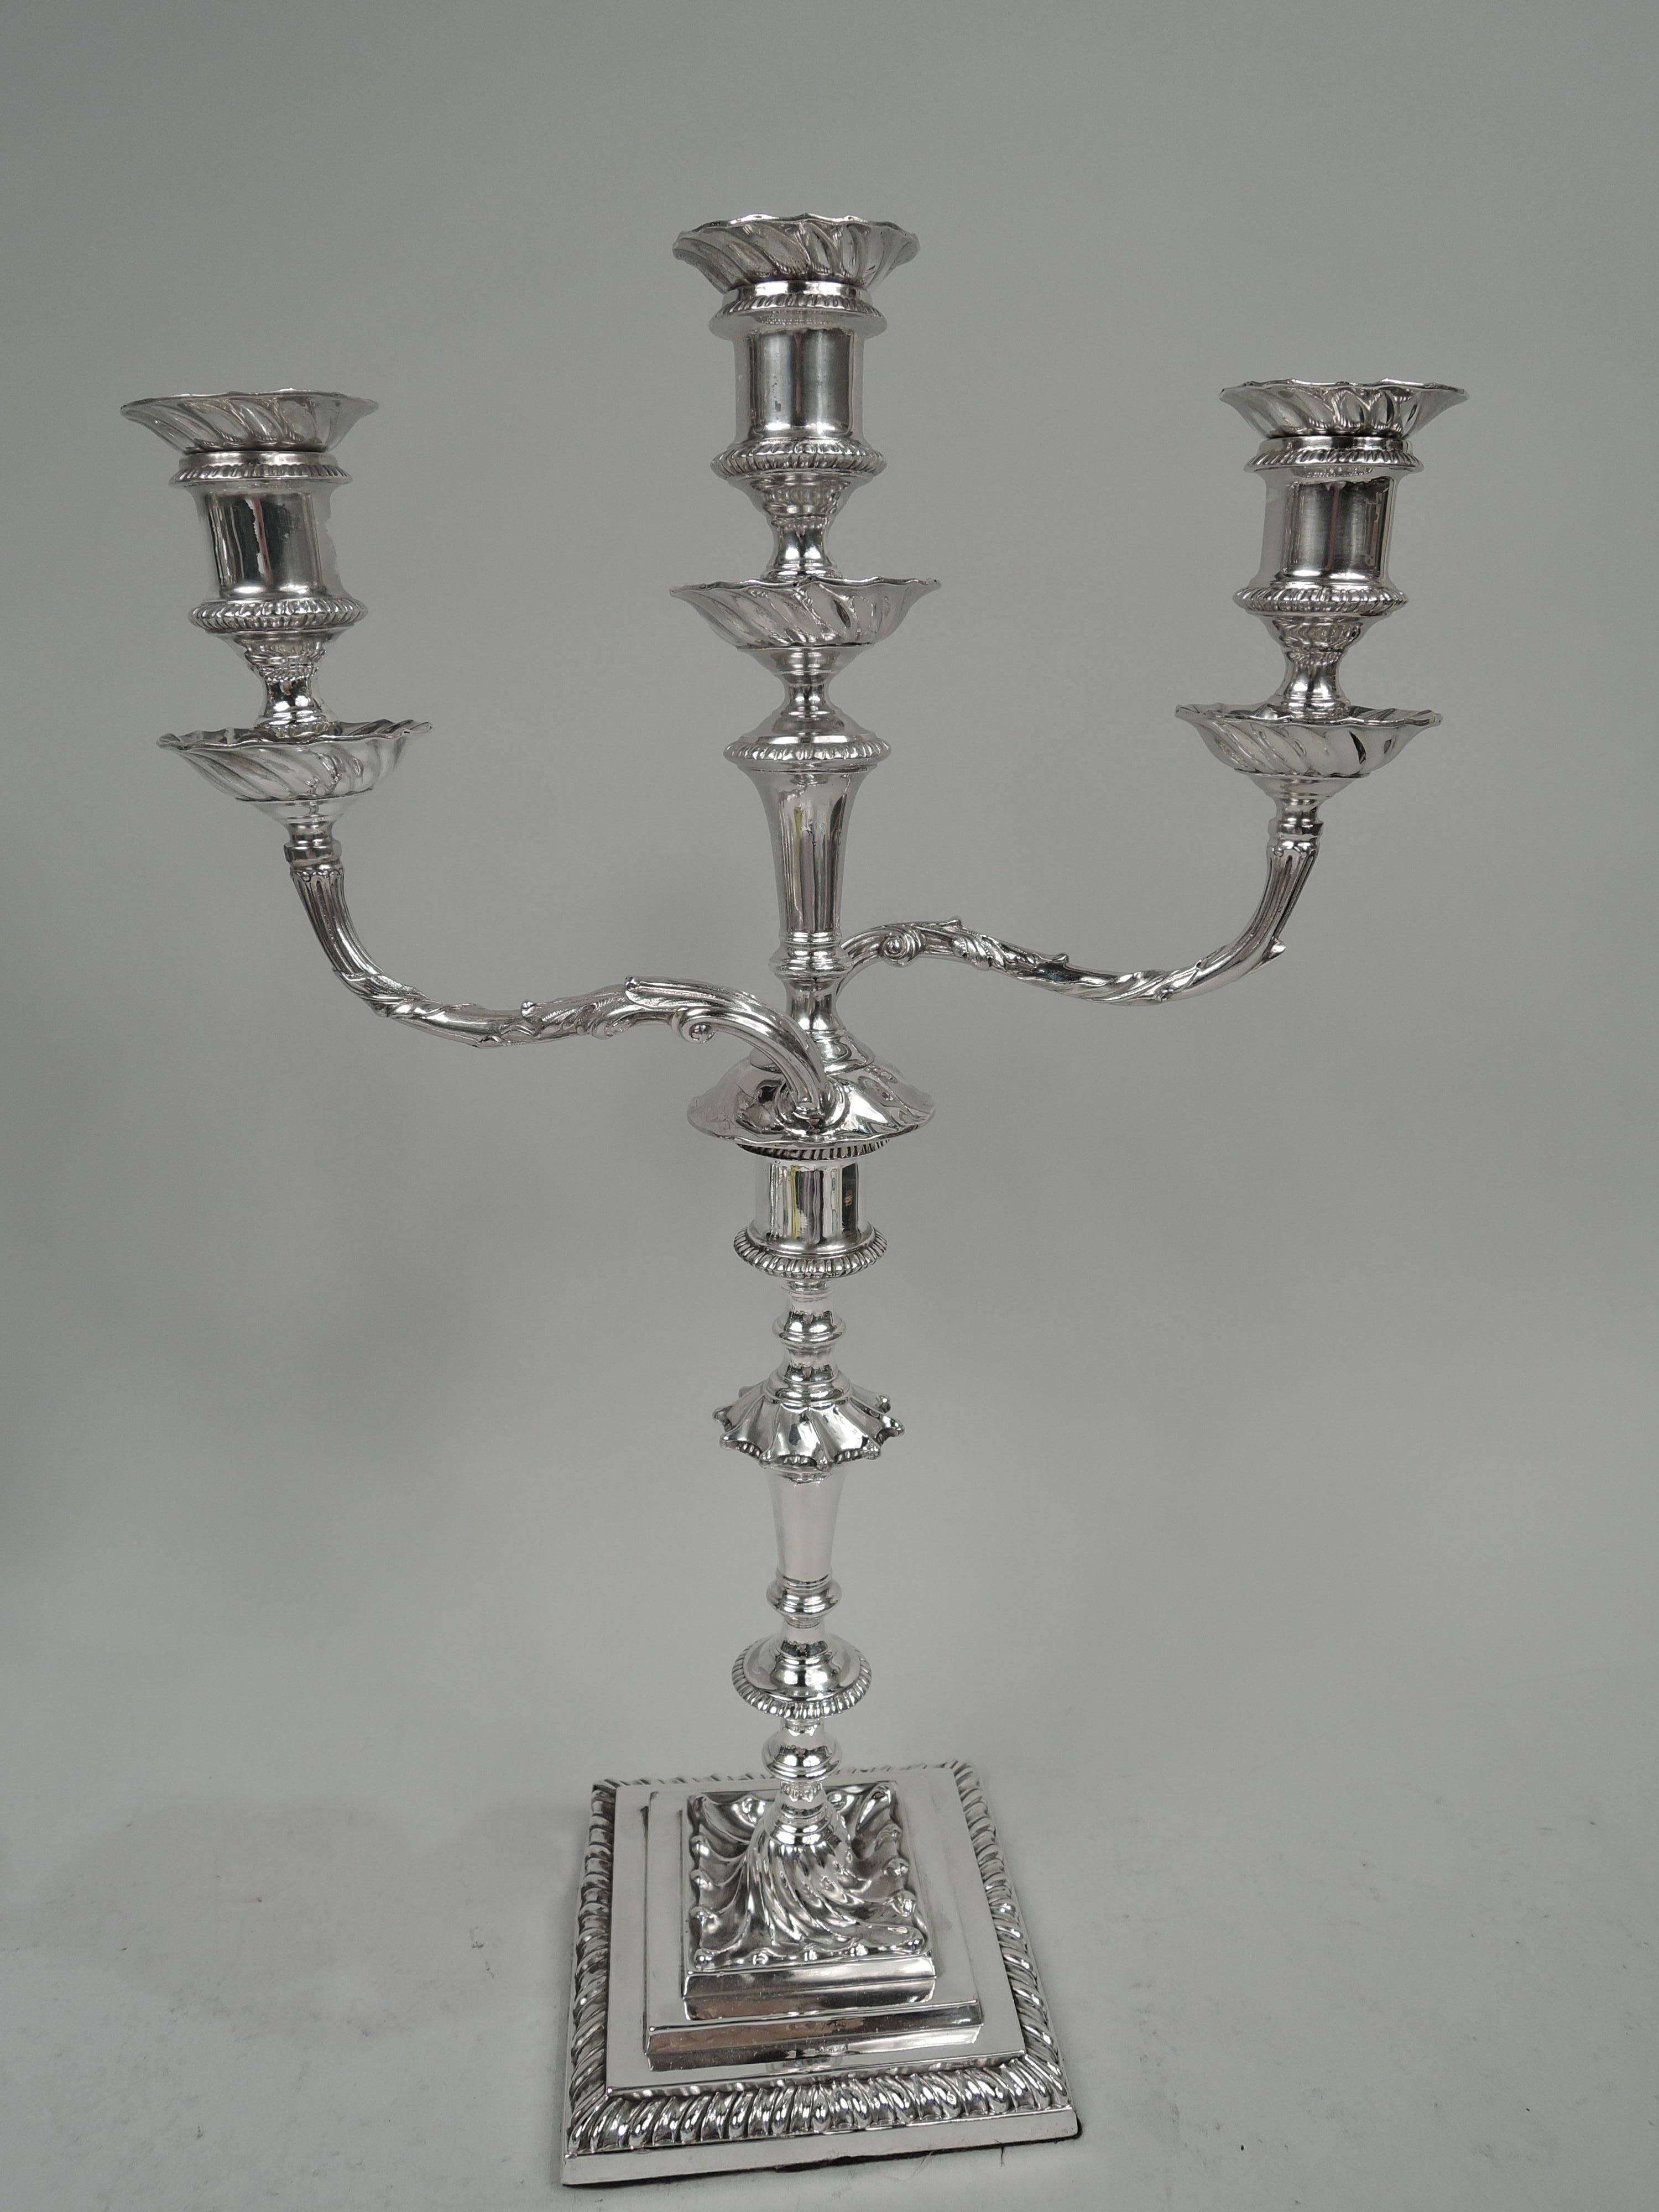 Pair of George V sterling silver 3-light candelabra. Made by Hawksworth, Eyre & Co., Ltd in Sheffield in 1919-1921. Each: Two leaf-wrapped arms, each terminating in single socket wrapped around raised central socket. Sockets spool form with wax pans